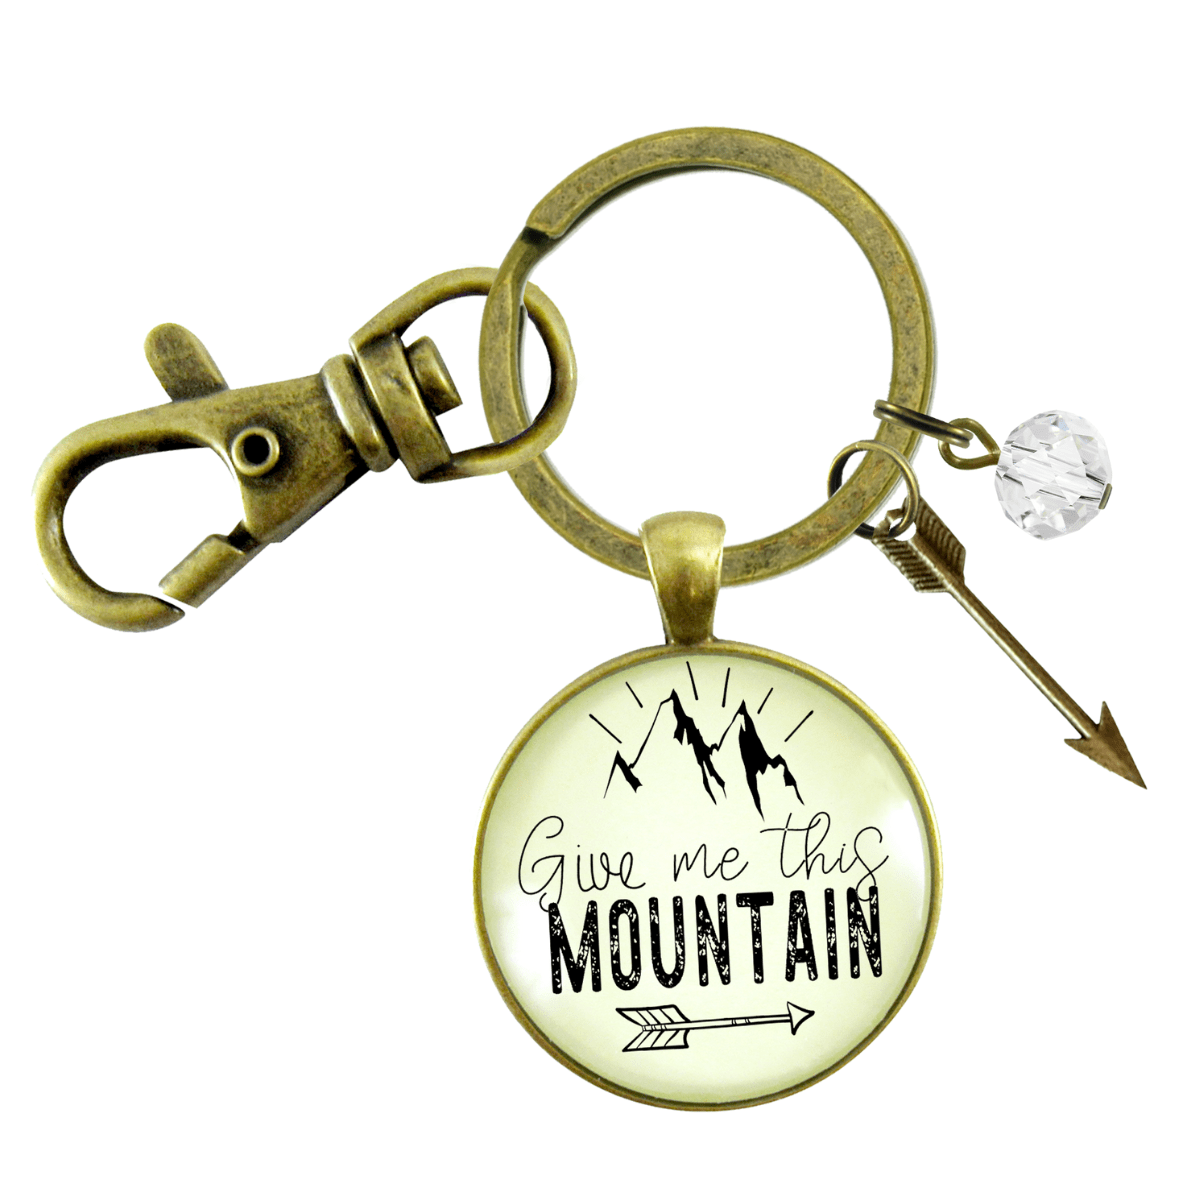 Give Me This Mountain Motivational Keychain Pendant Mantra Quote Arrow Charm - Gutsy Goodness